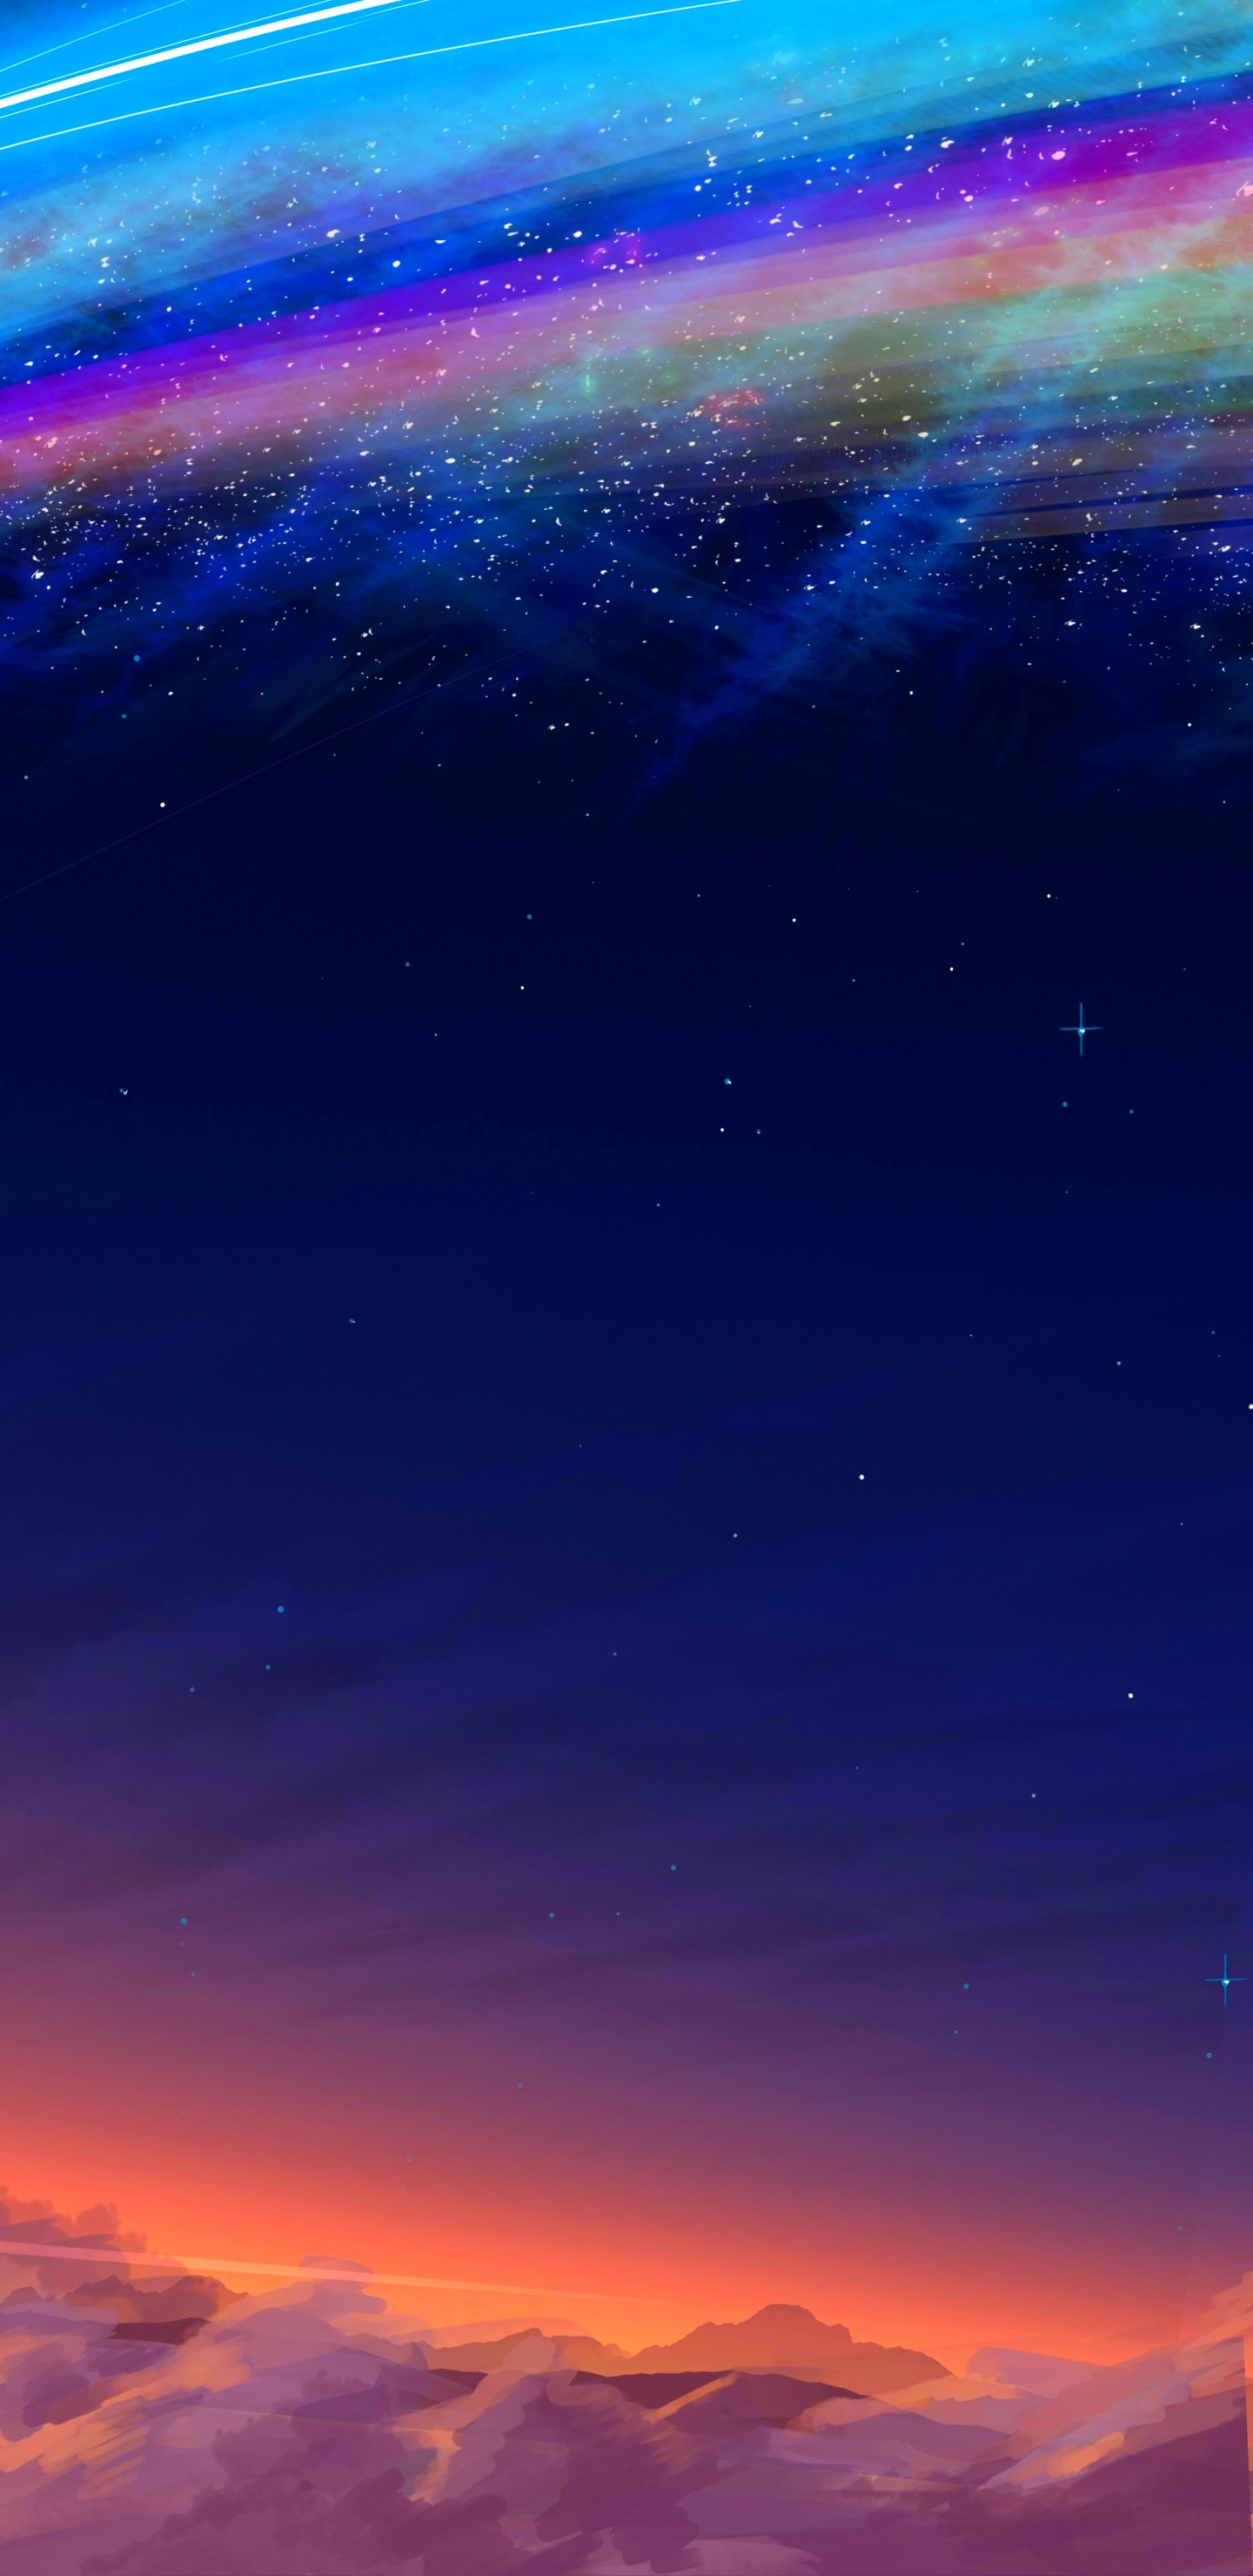 100+] Your Name 4k Wallpapers